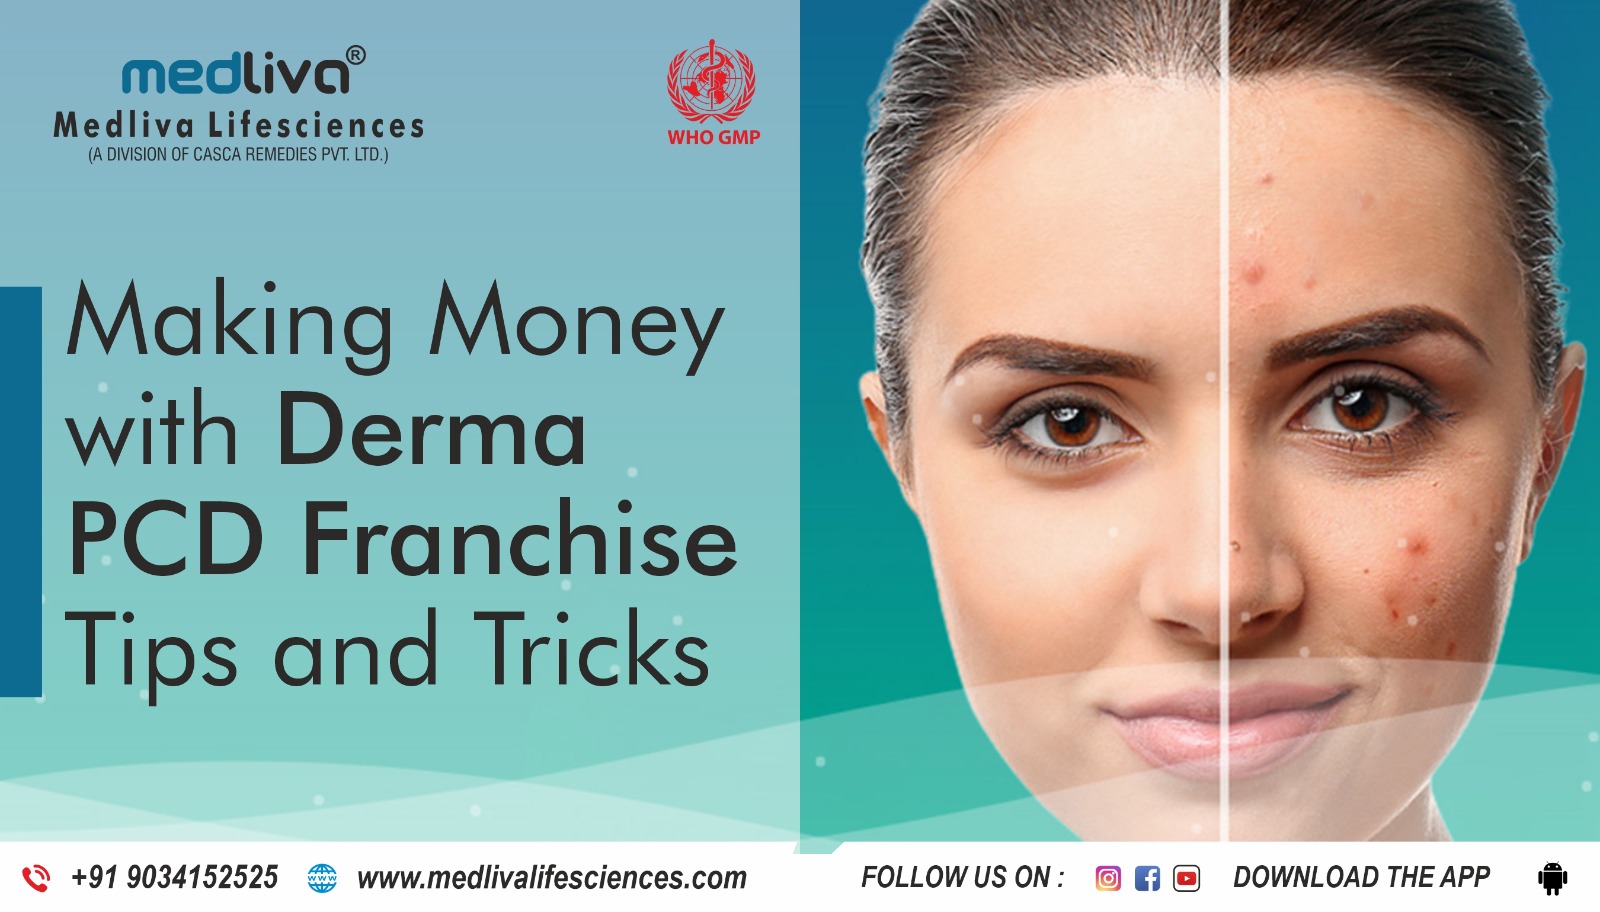 Making Money with Derma PCD Franchise: Tips and Tricks